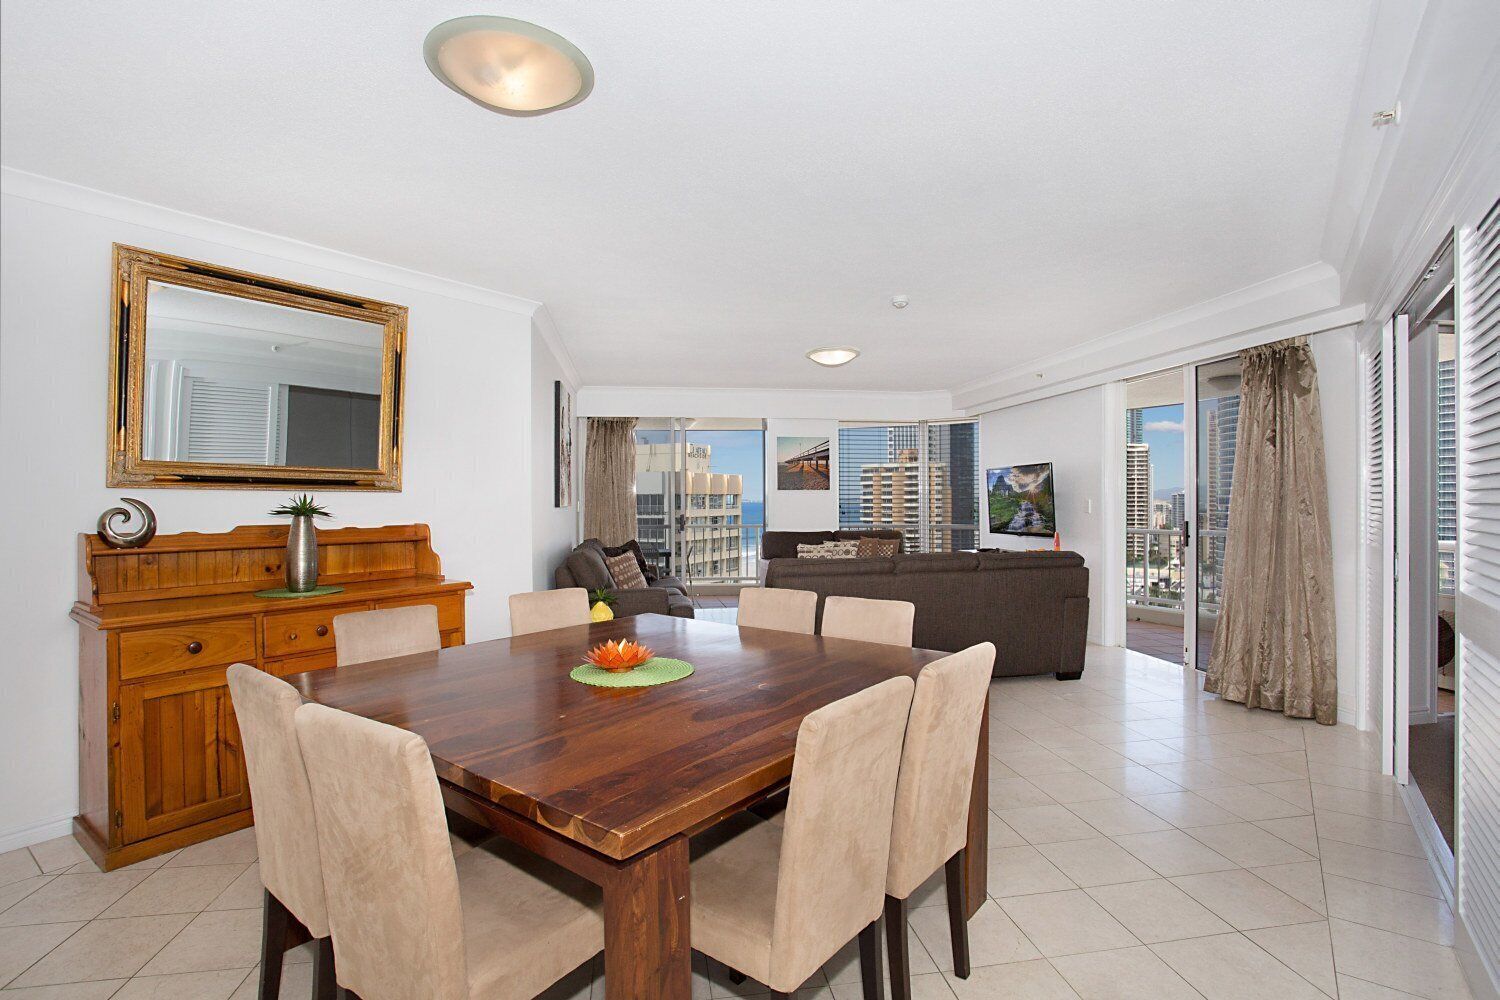 Luxury Surfers Paradise Accommodation, Apartment 287 is Indeed, Very Affordable